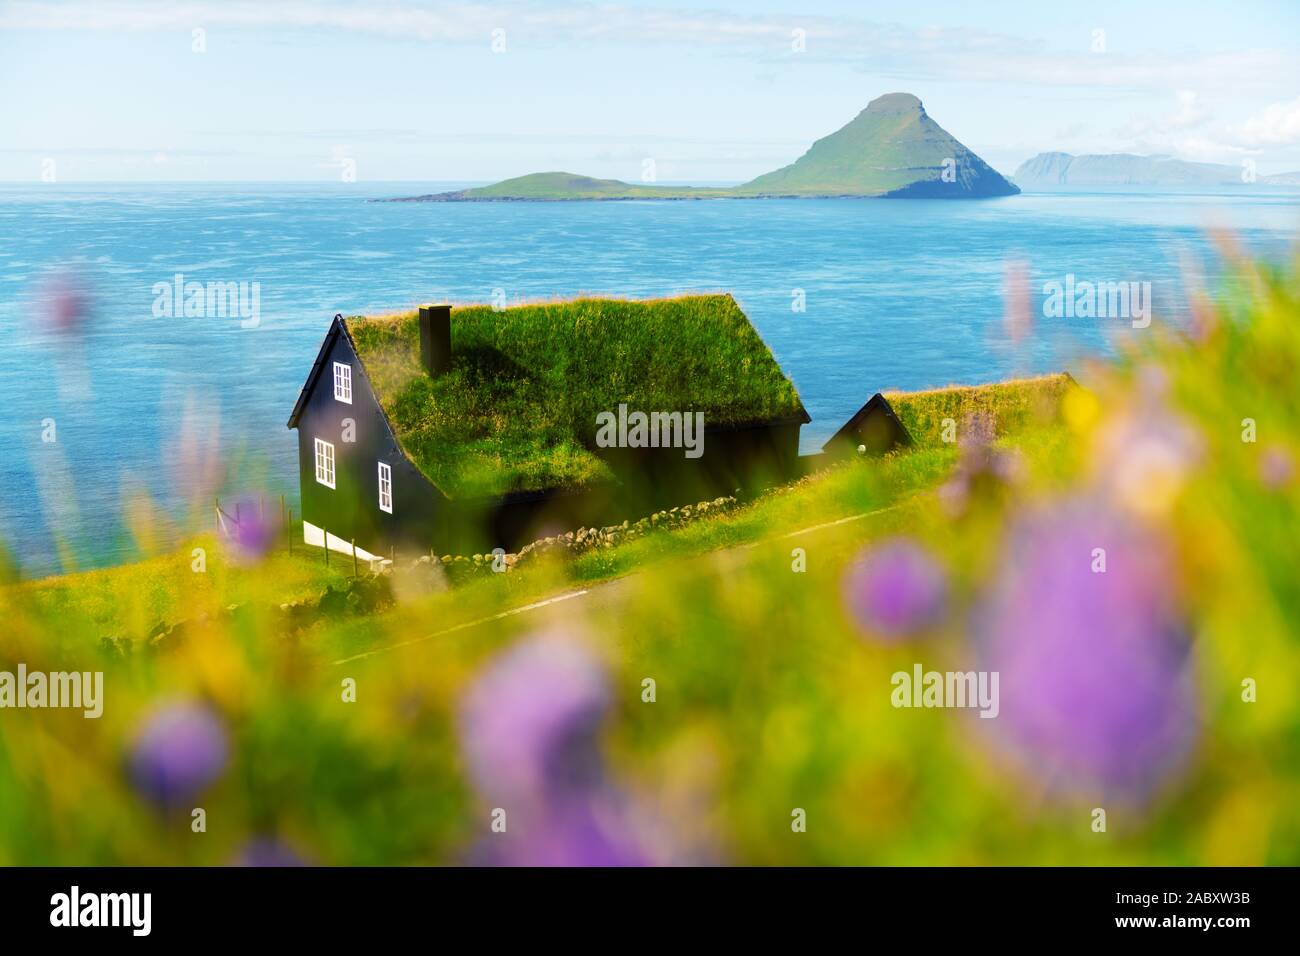 Foggy morning view of a house with typical turf-top grass roof in the Velbastadur village on Streymoy island, Faroe islands, Denmark. Landscape photography Stock Photo